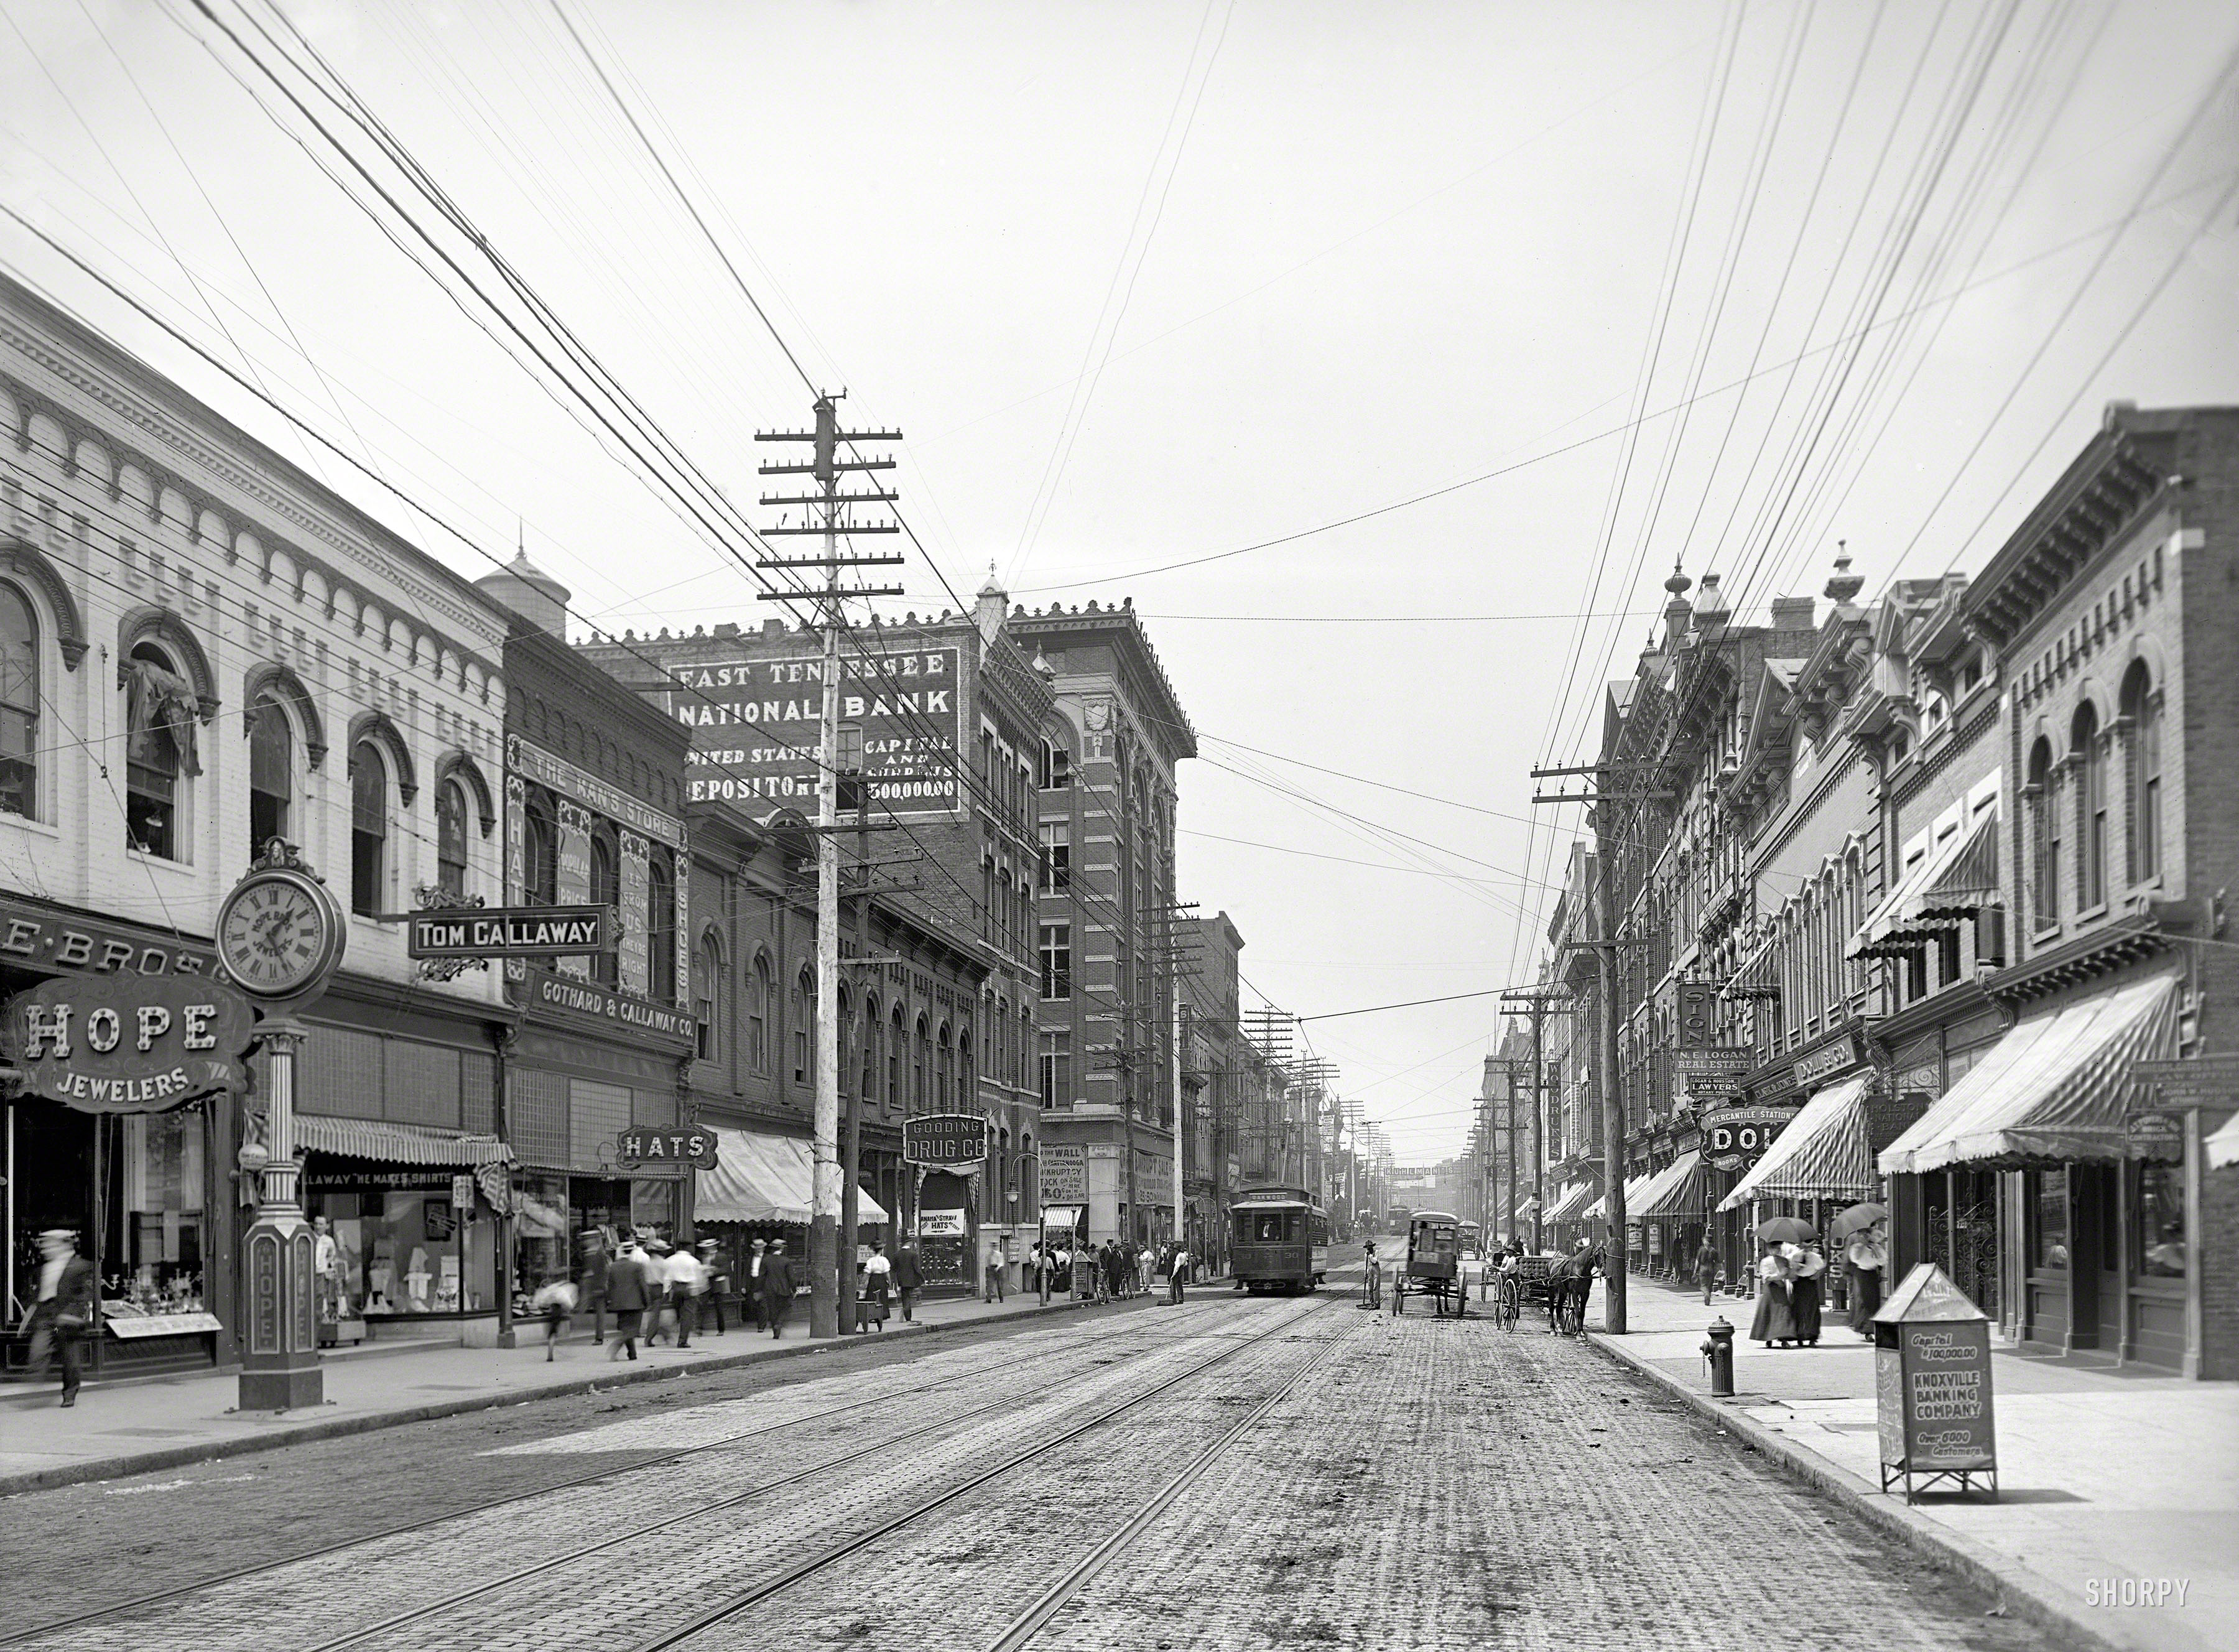 Knoxville, Tennessee, circa 1905. "Looking north on Gay Street from near Clinch Avenue." A pulsing commercial artery where Hope Jewelers, The Man's Store and East Tennessee National Bank are among the businesses vying for your trade. 8x10 inch glass negative, Detroit Publishing Company. View full size.